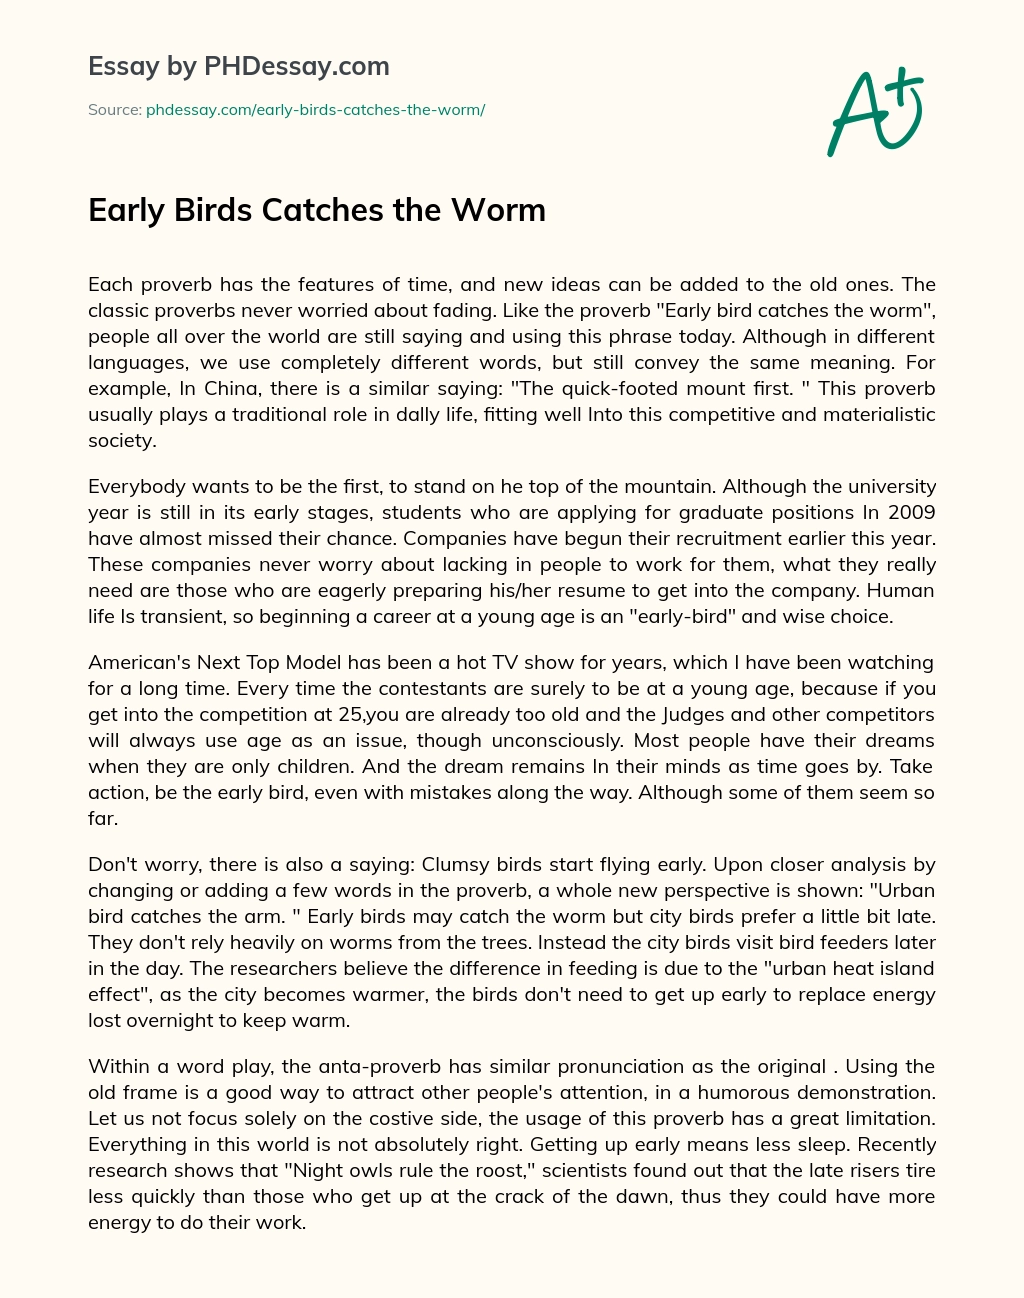 Early Birds Catches the Worm essay